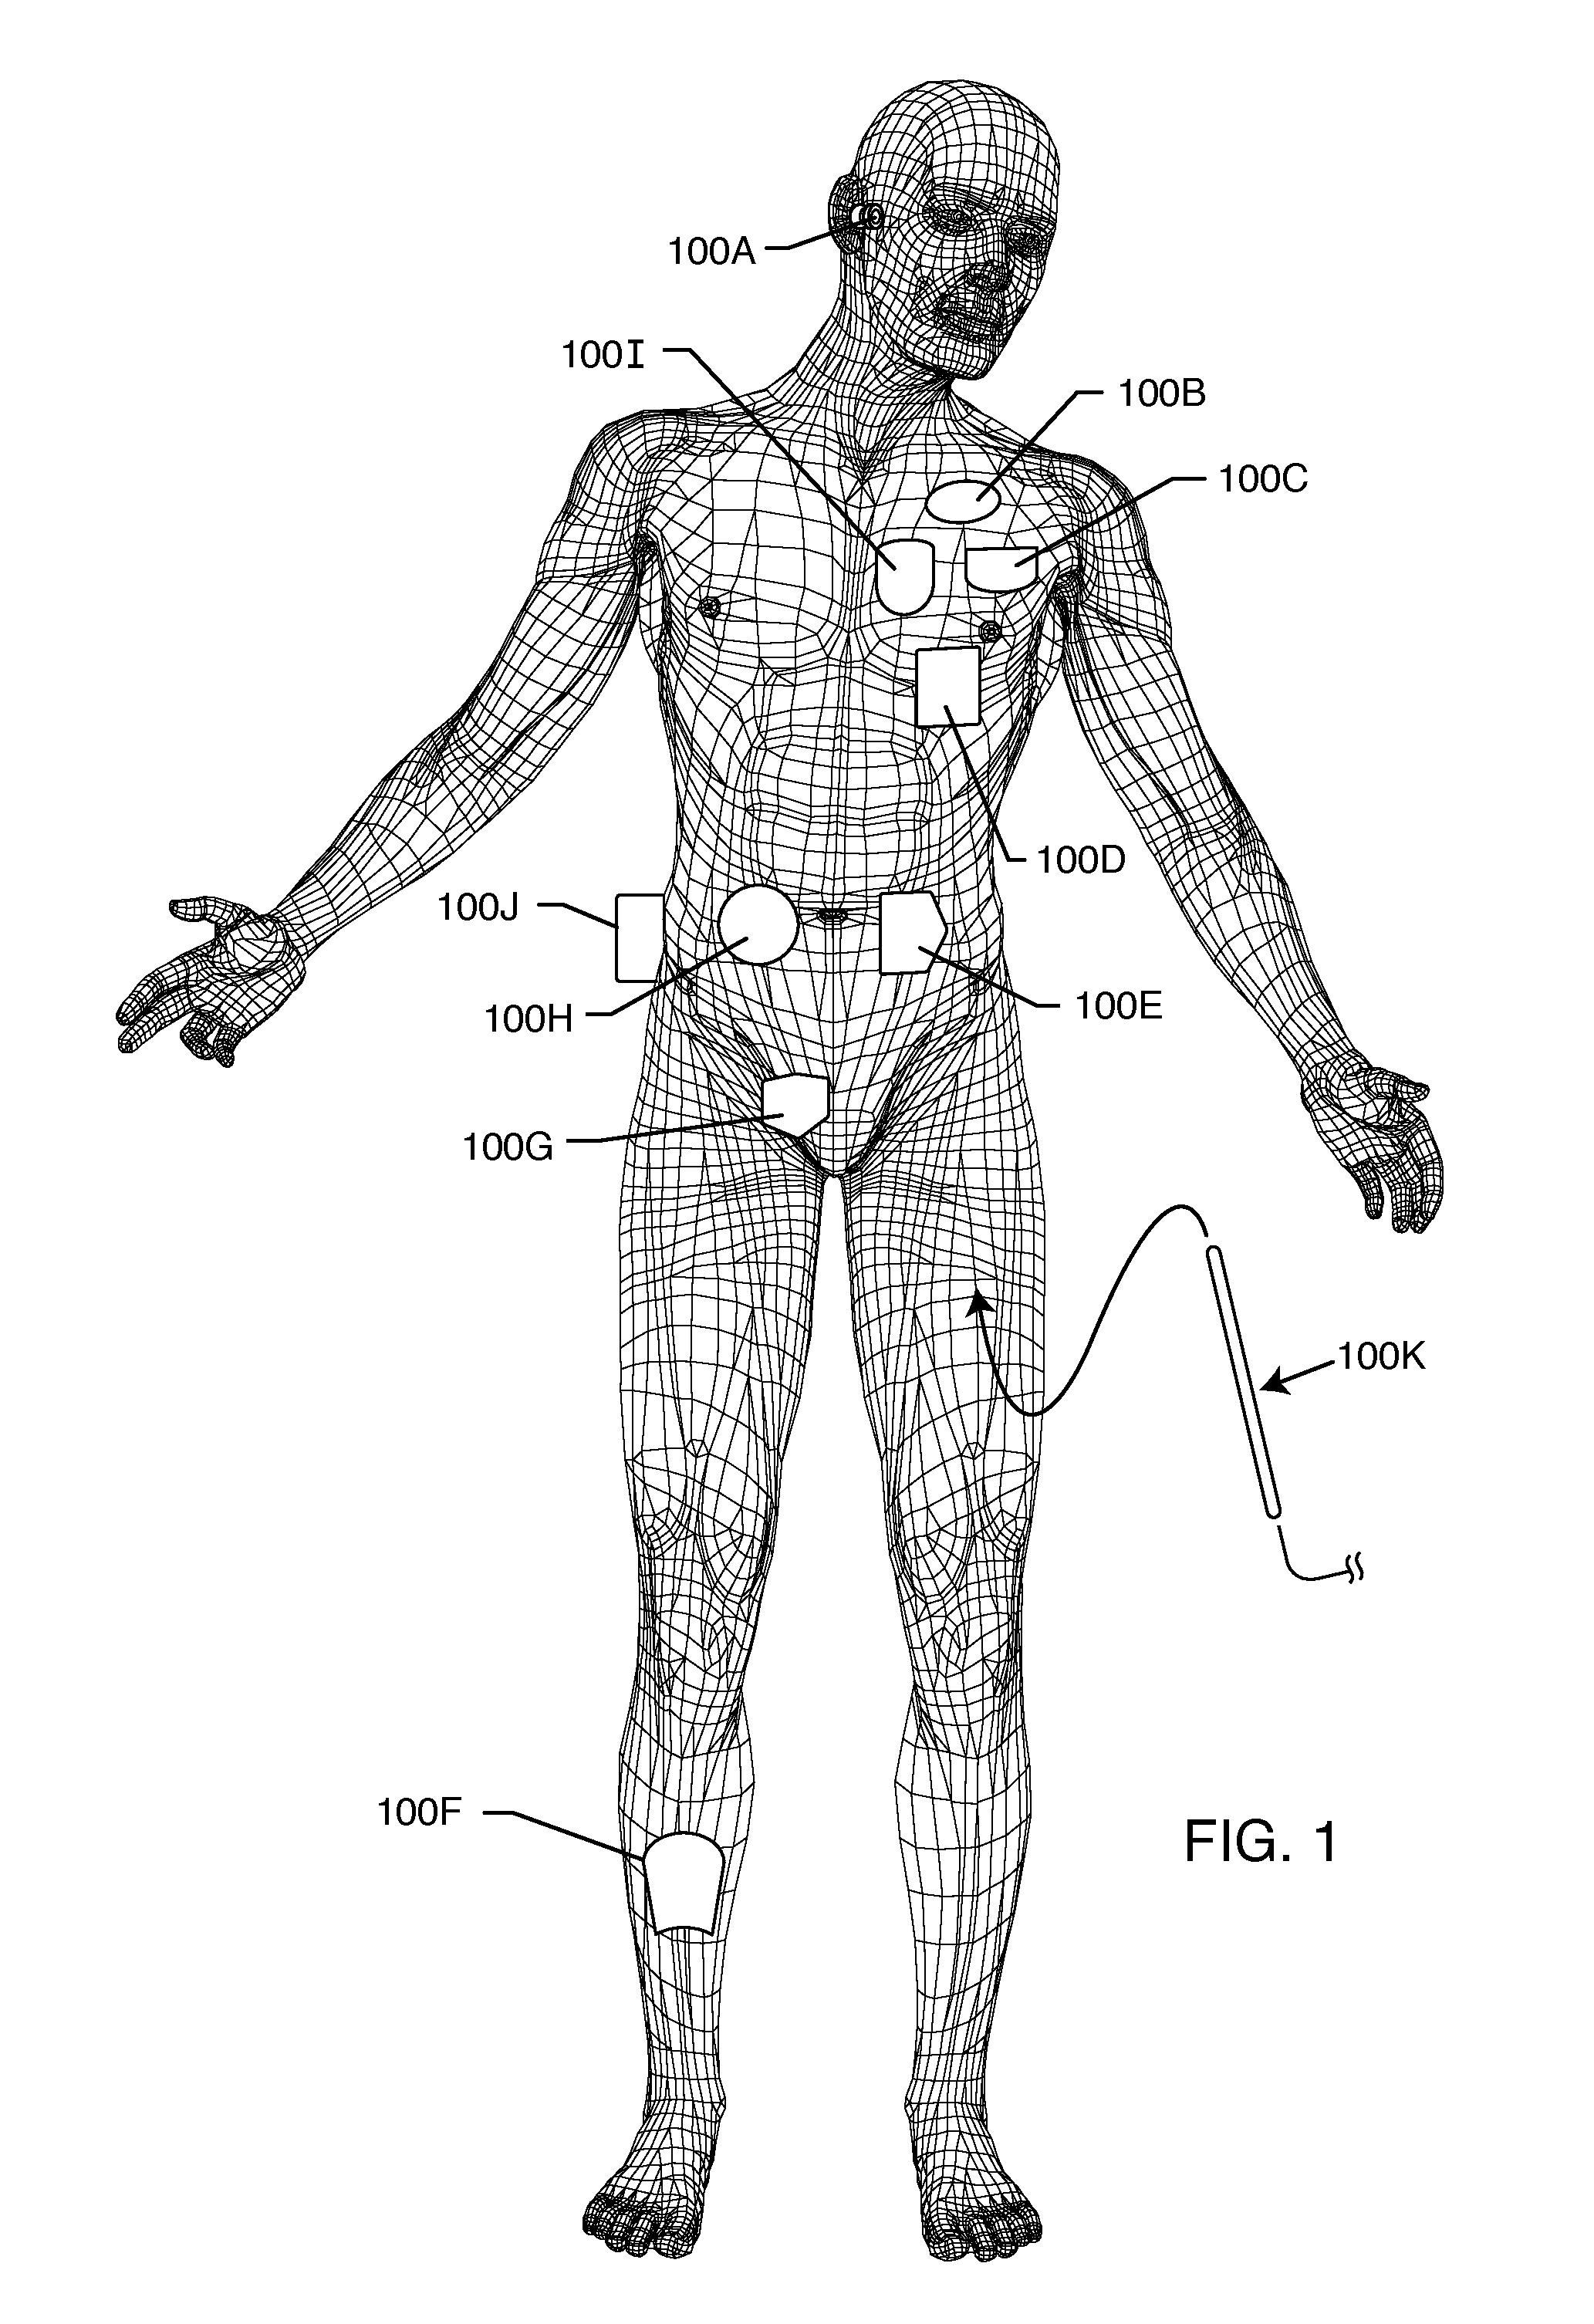 Implantable lead bandstop filter employing an inductive coil with parasitic capacitance to enhance MRI compatability of active medical devices